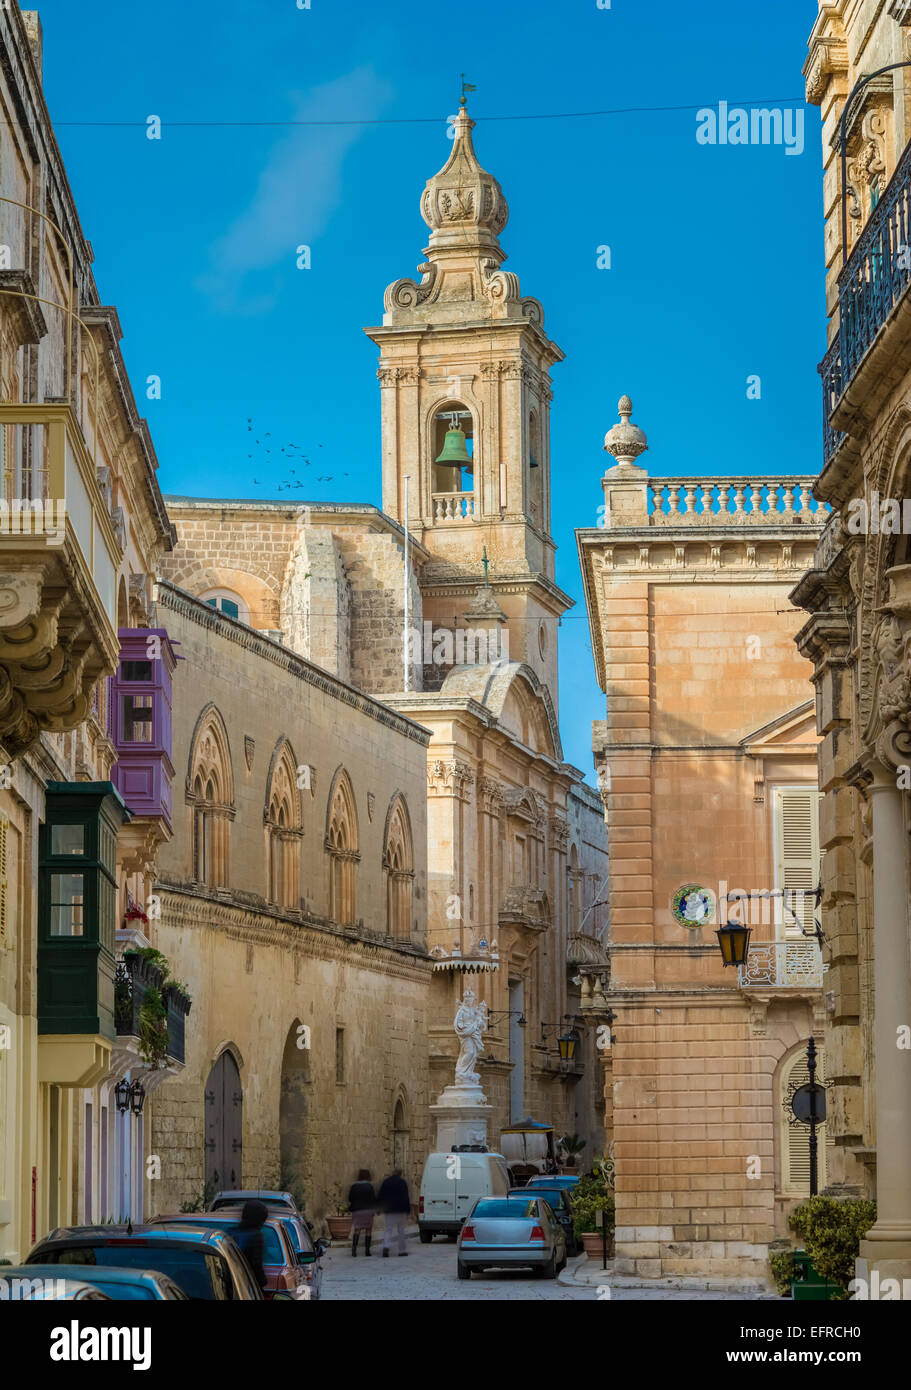 Maltese narrow street in Mdina with stone buildings in traditional architecture. Stock Photo